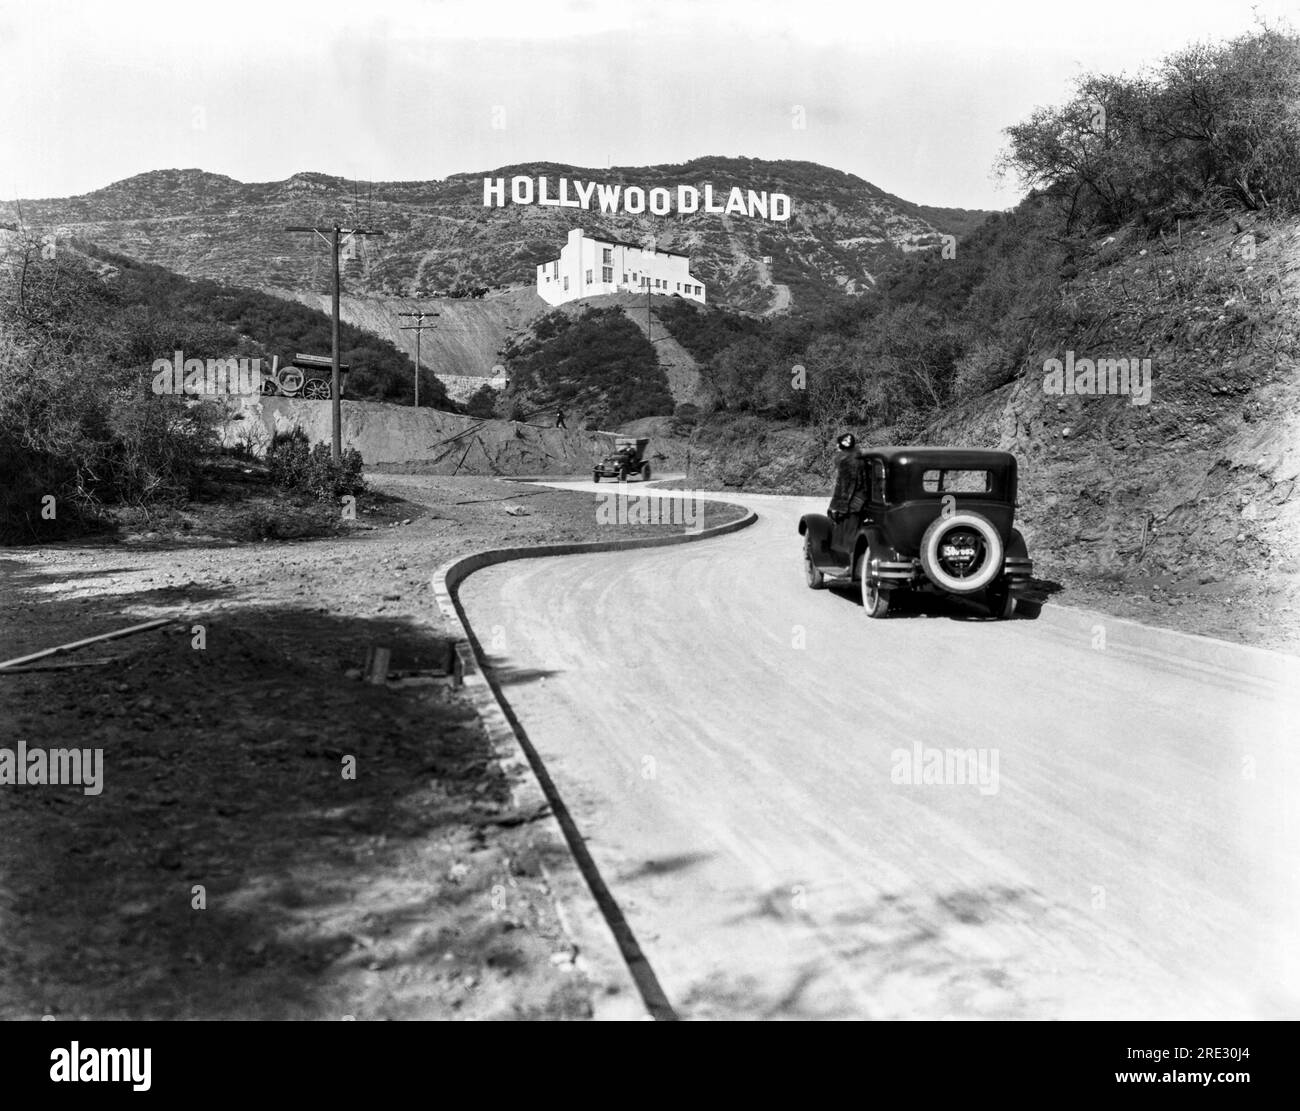 Hollywood, Los Angeles:  c. 1924 A sign advertises the opening of the Hollywoodland housing development in the hills on Mulholland Drive overlooking Los Angeles. The white building below the sign is the Kanst Art Gallery, which opened on April 1, 1924 Stock Photo